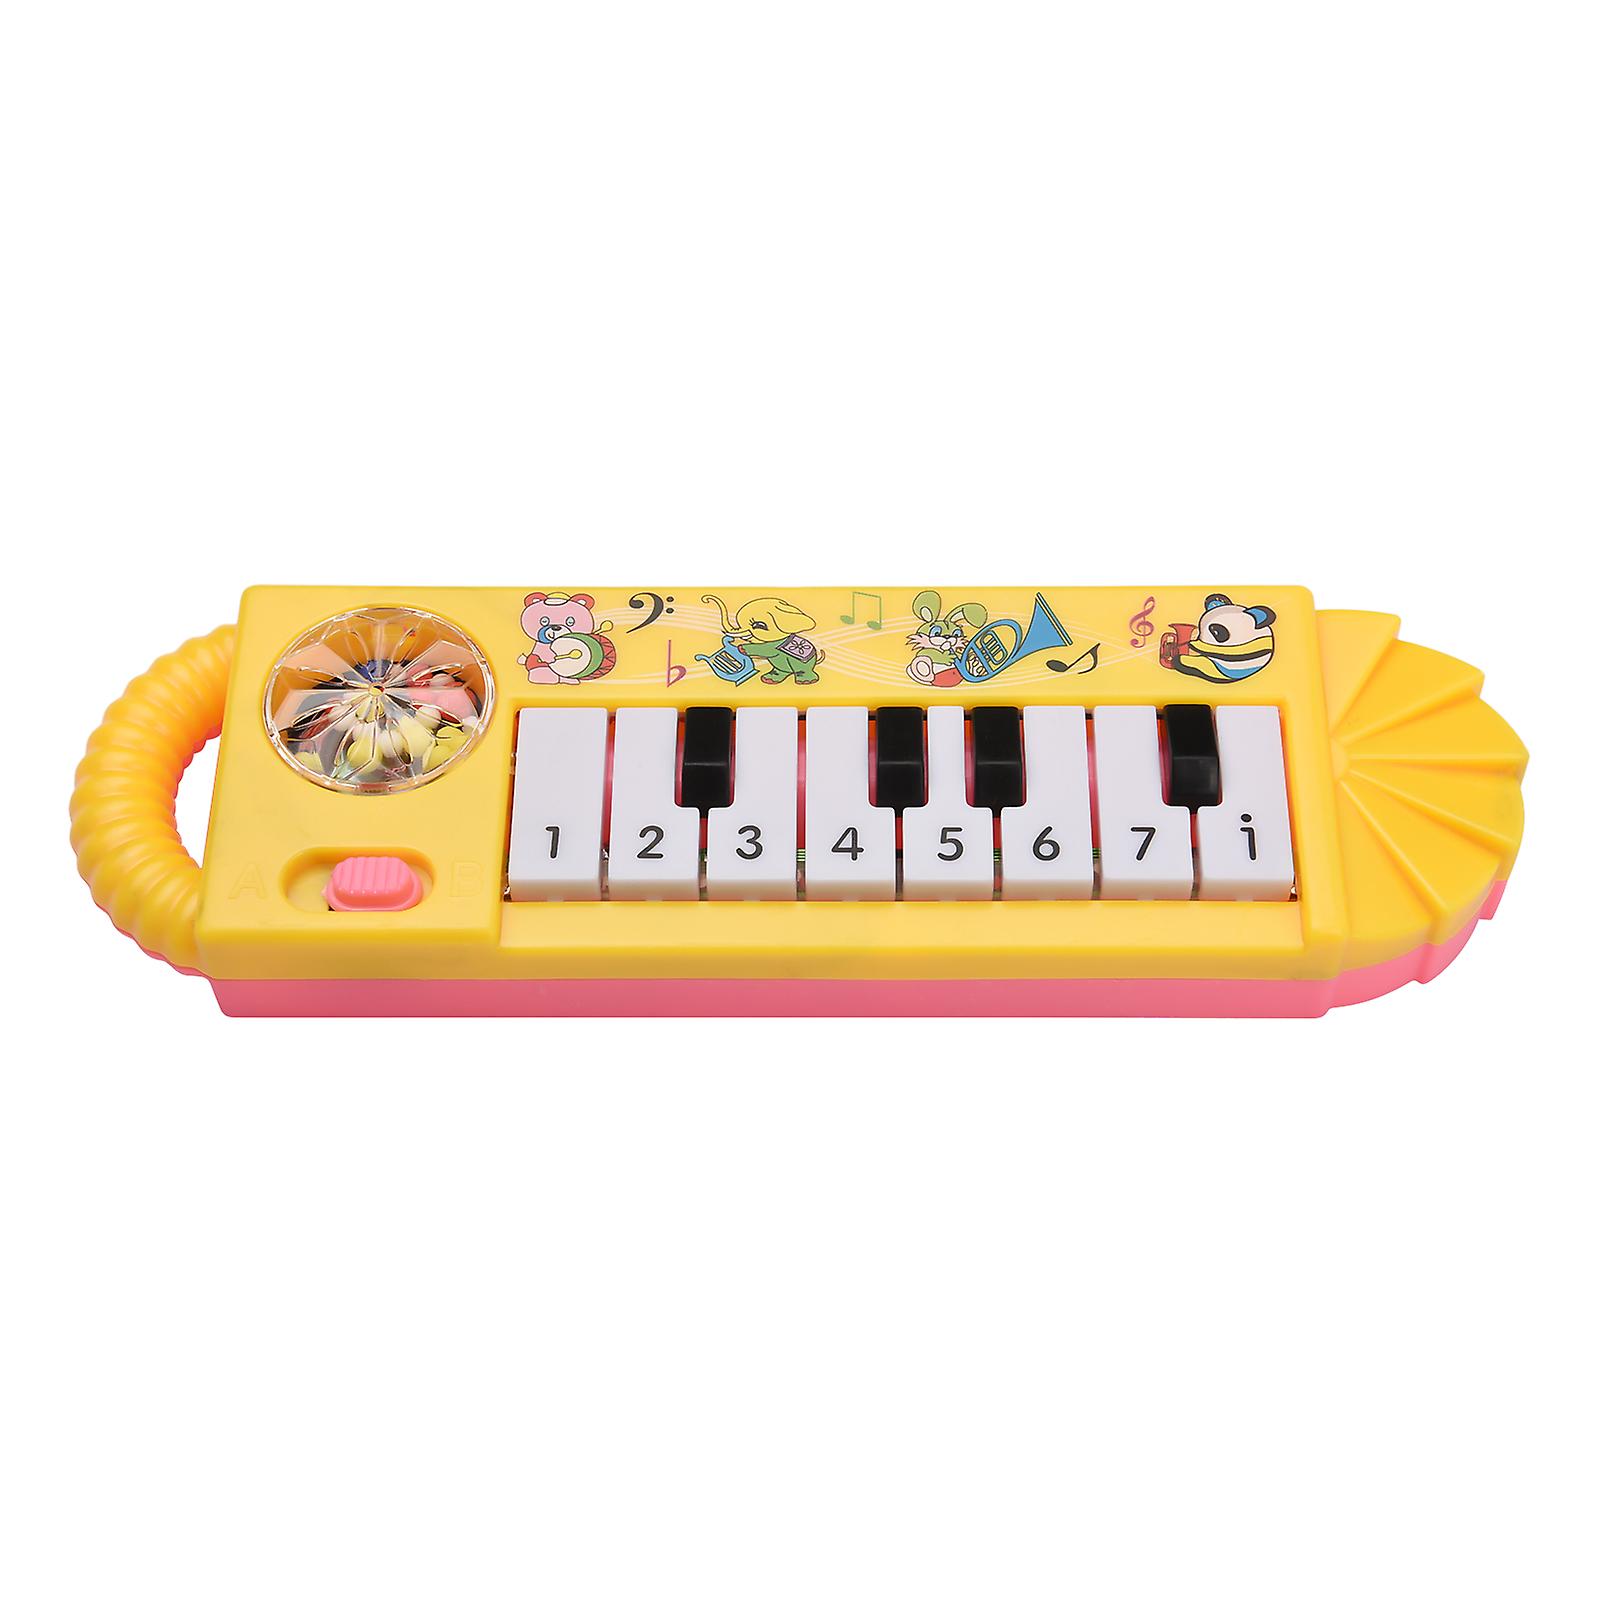 Mini 8-key Electronic Piano Toy For Children Early Musical Education Yellow